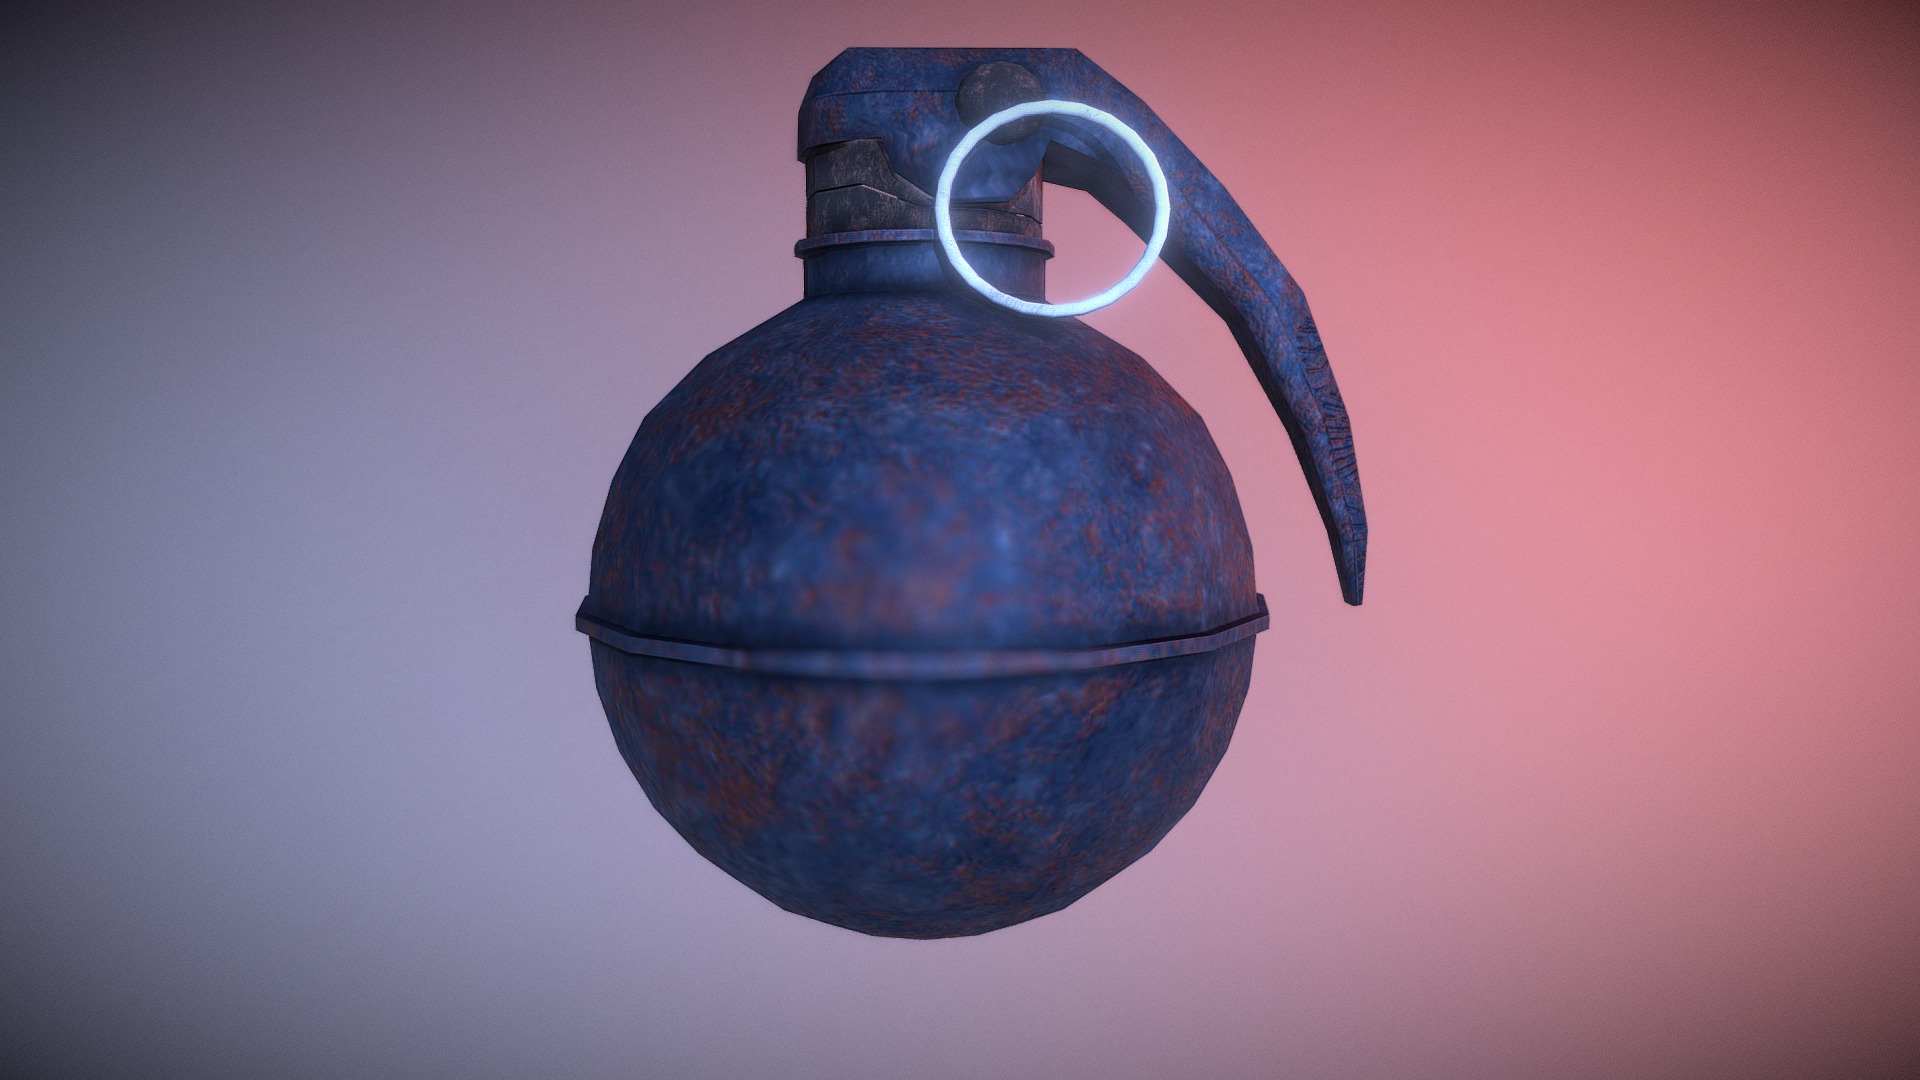 3D model Grenade_Low poly _PBR_.gltf - This is a 3D model of the Grenade_Low poly _PBR_.gltf. The 3D model is about a purple teapot on a pink background.